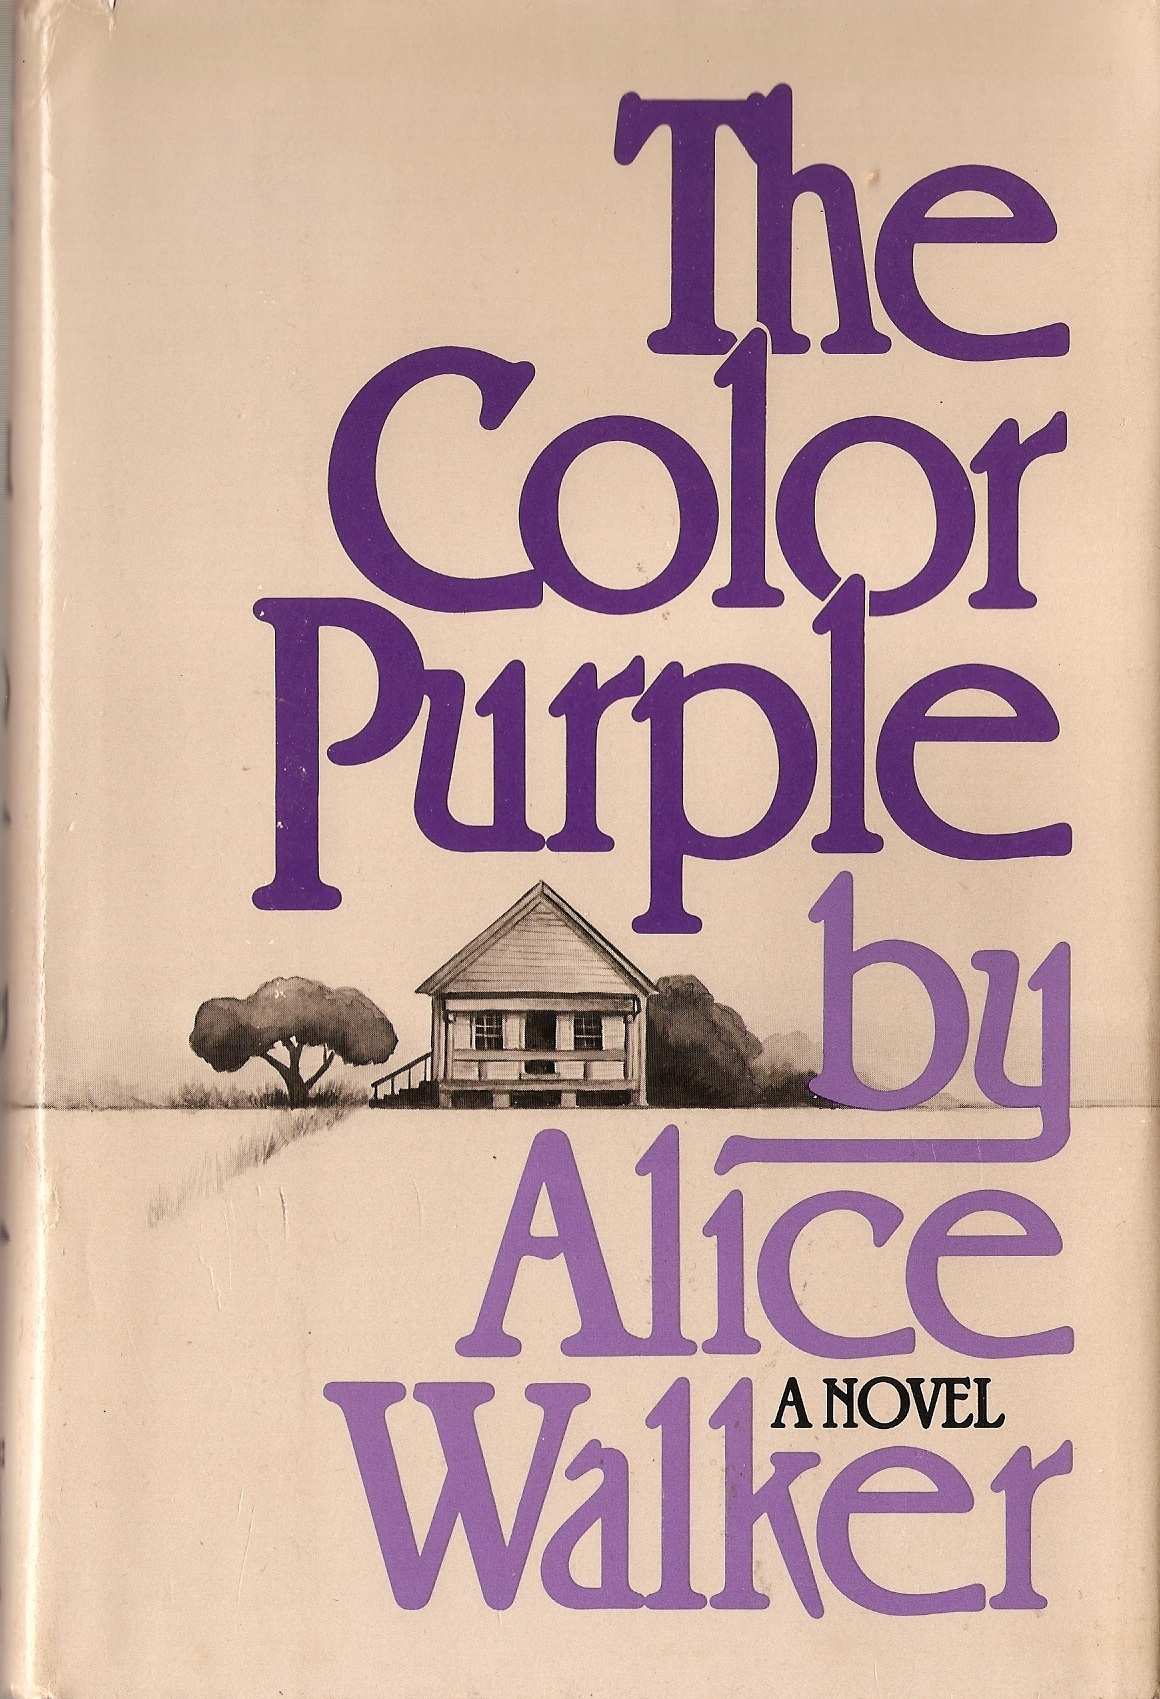 How Many Pages Is The Color Purple The Color Purple Page Count The Color Purple Pages Quotes With Page